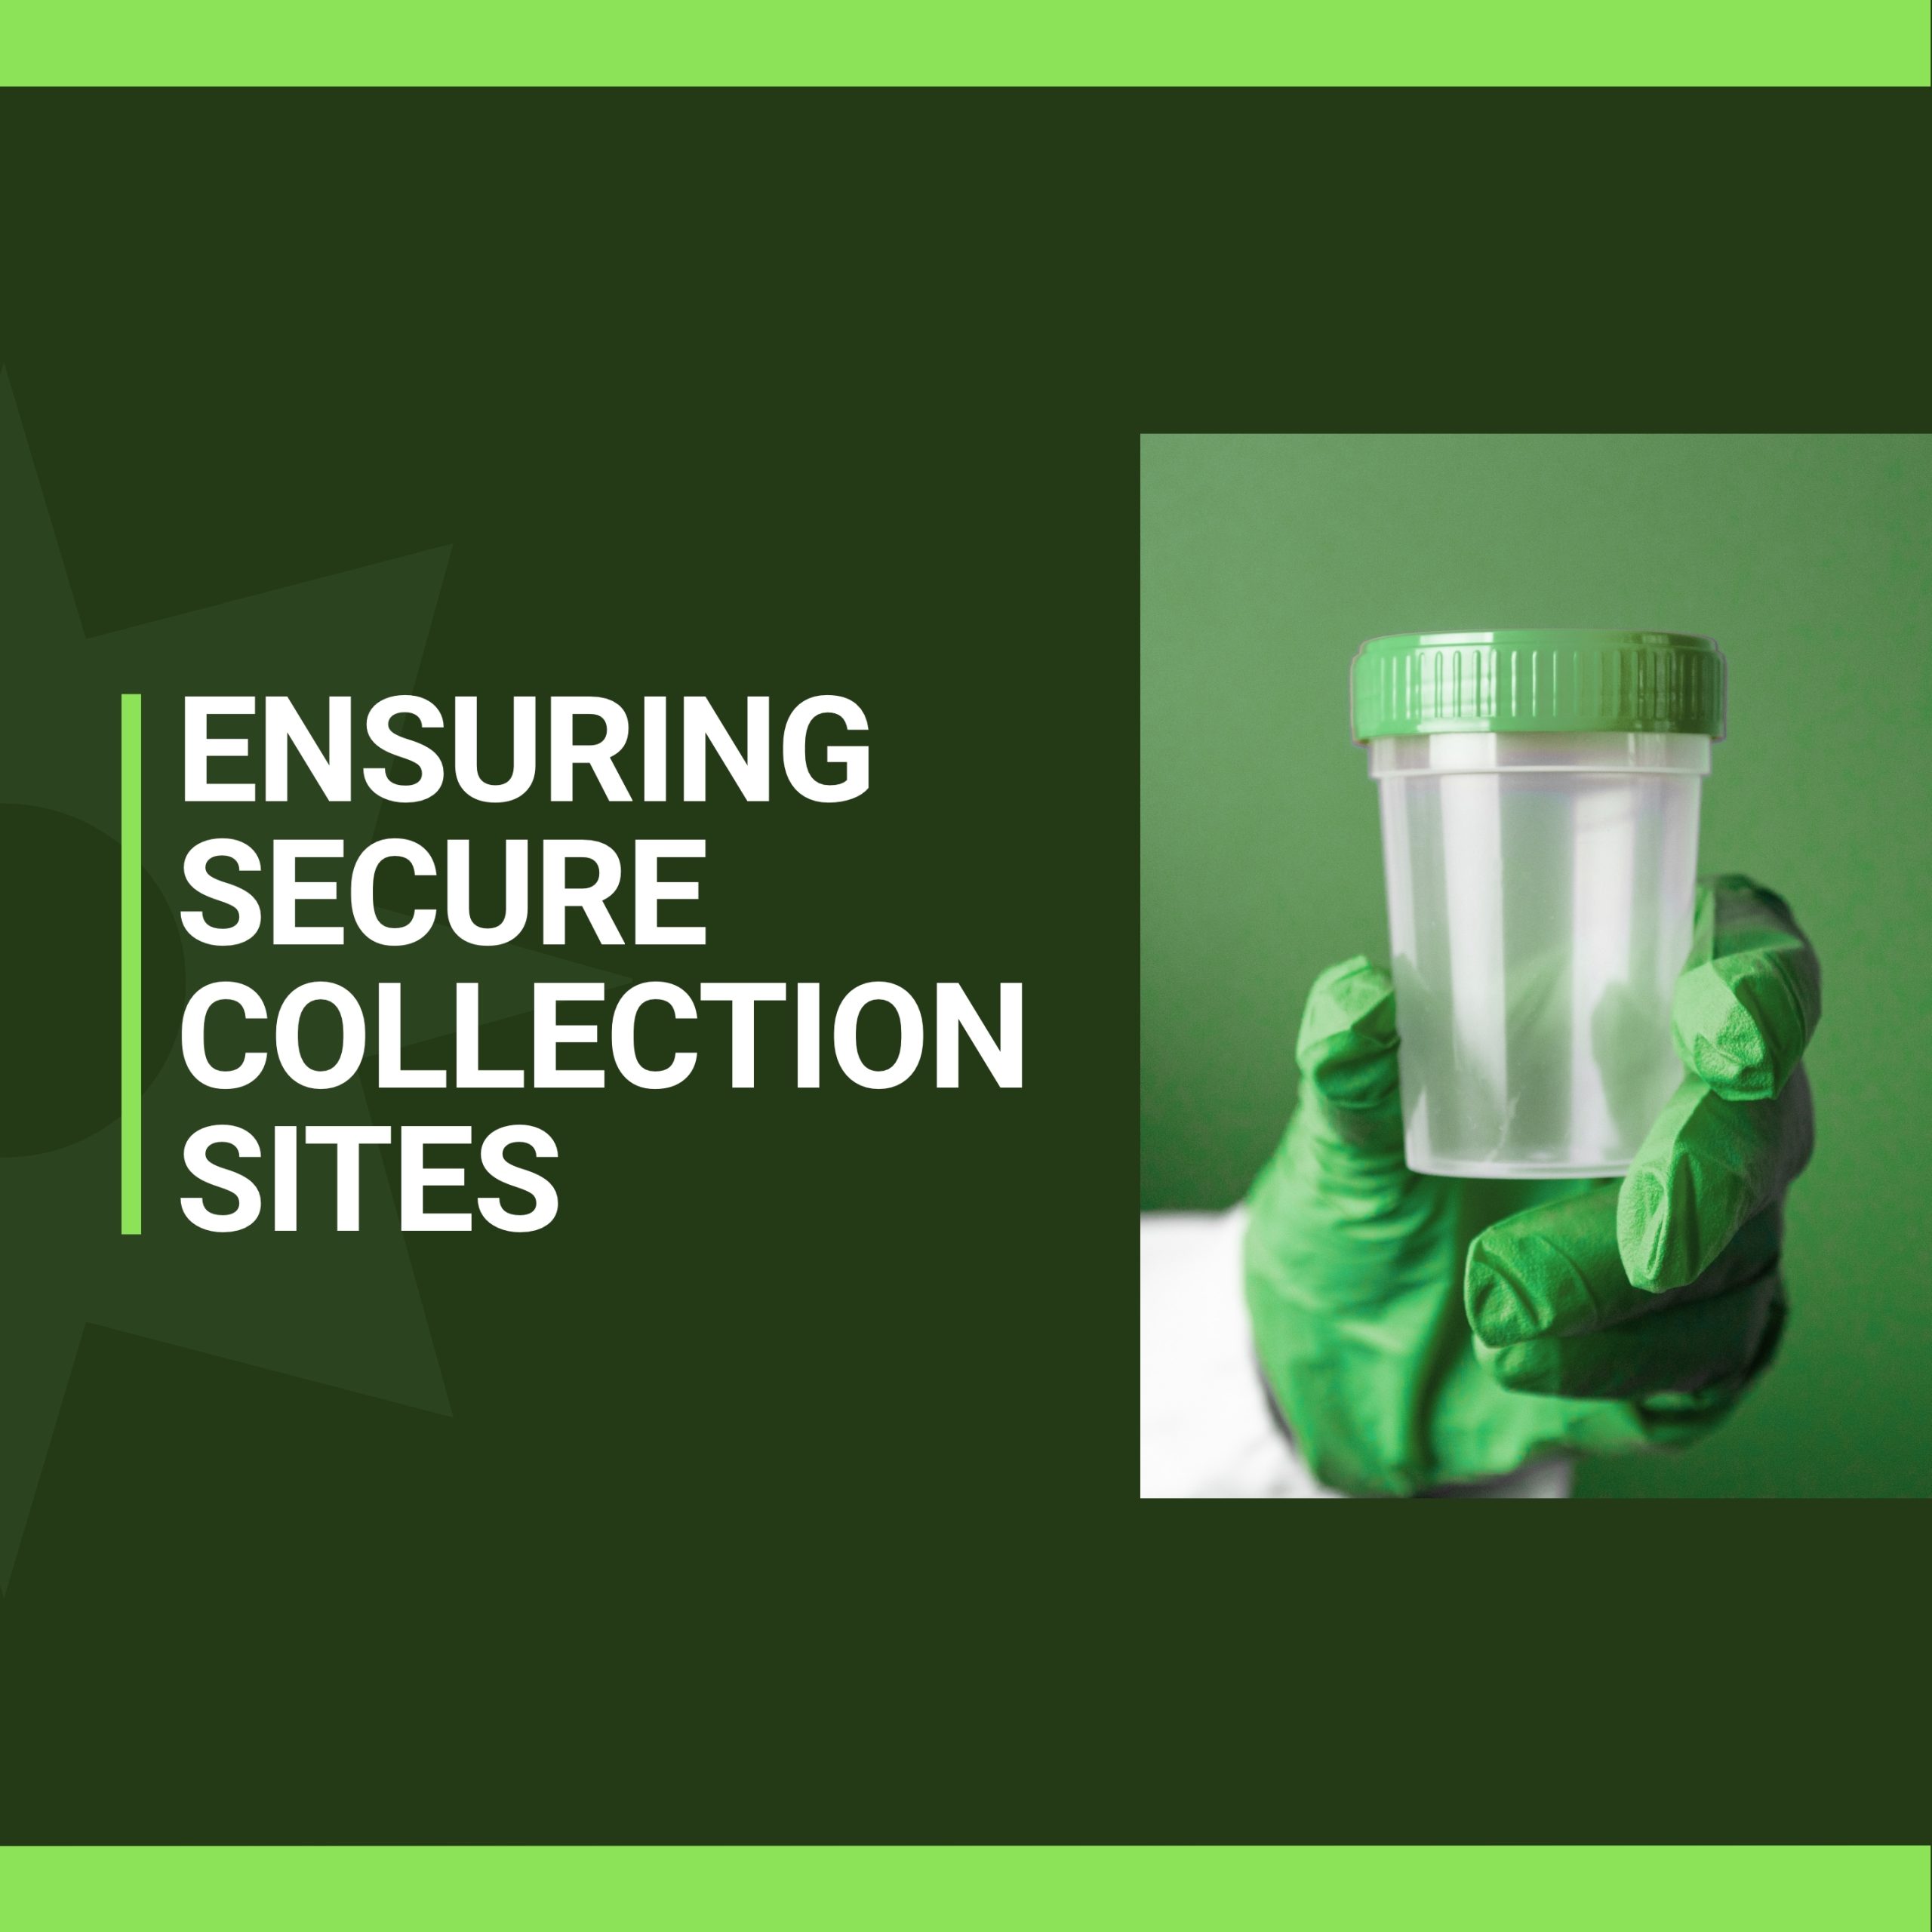 Ensuring Secure Collection Sites